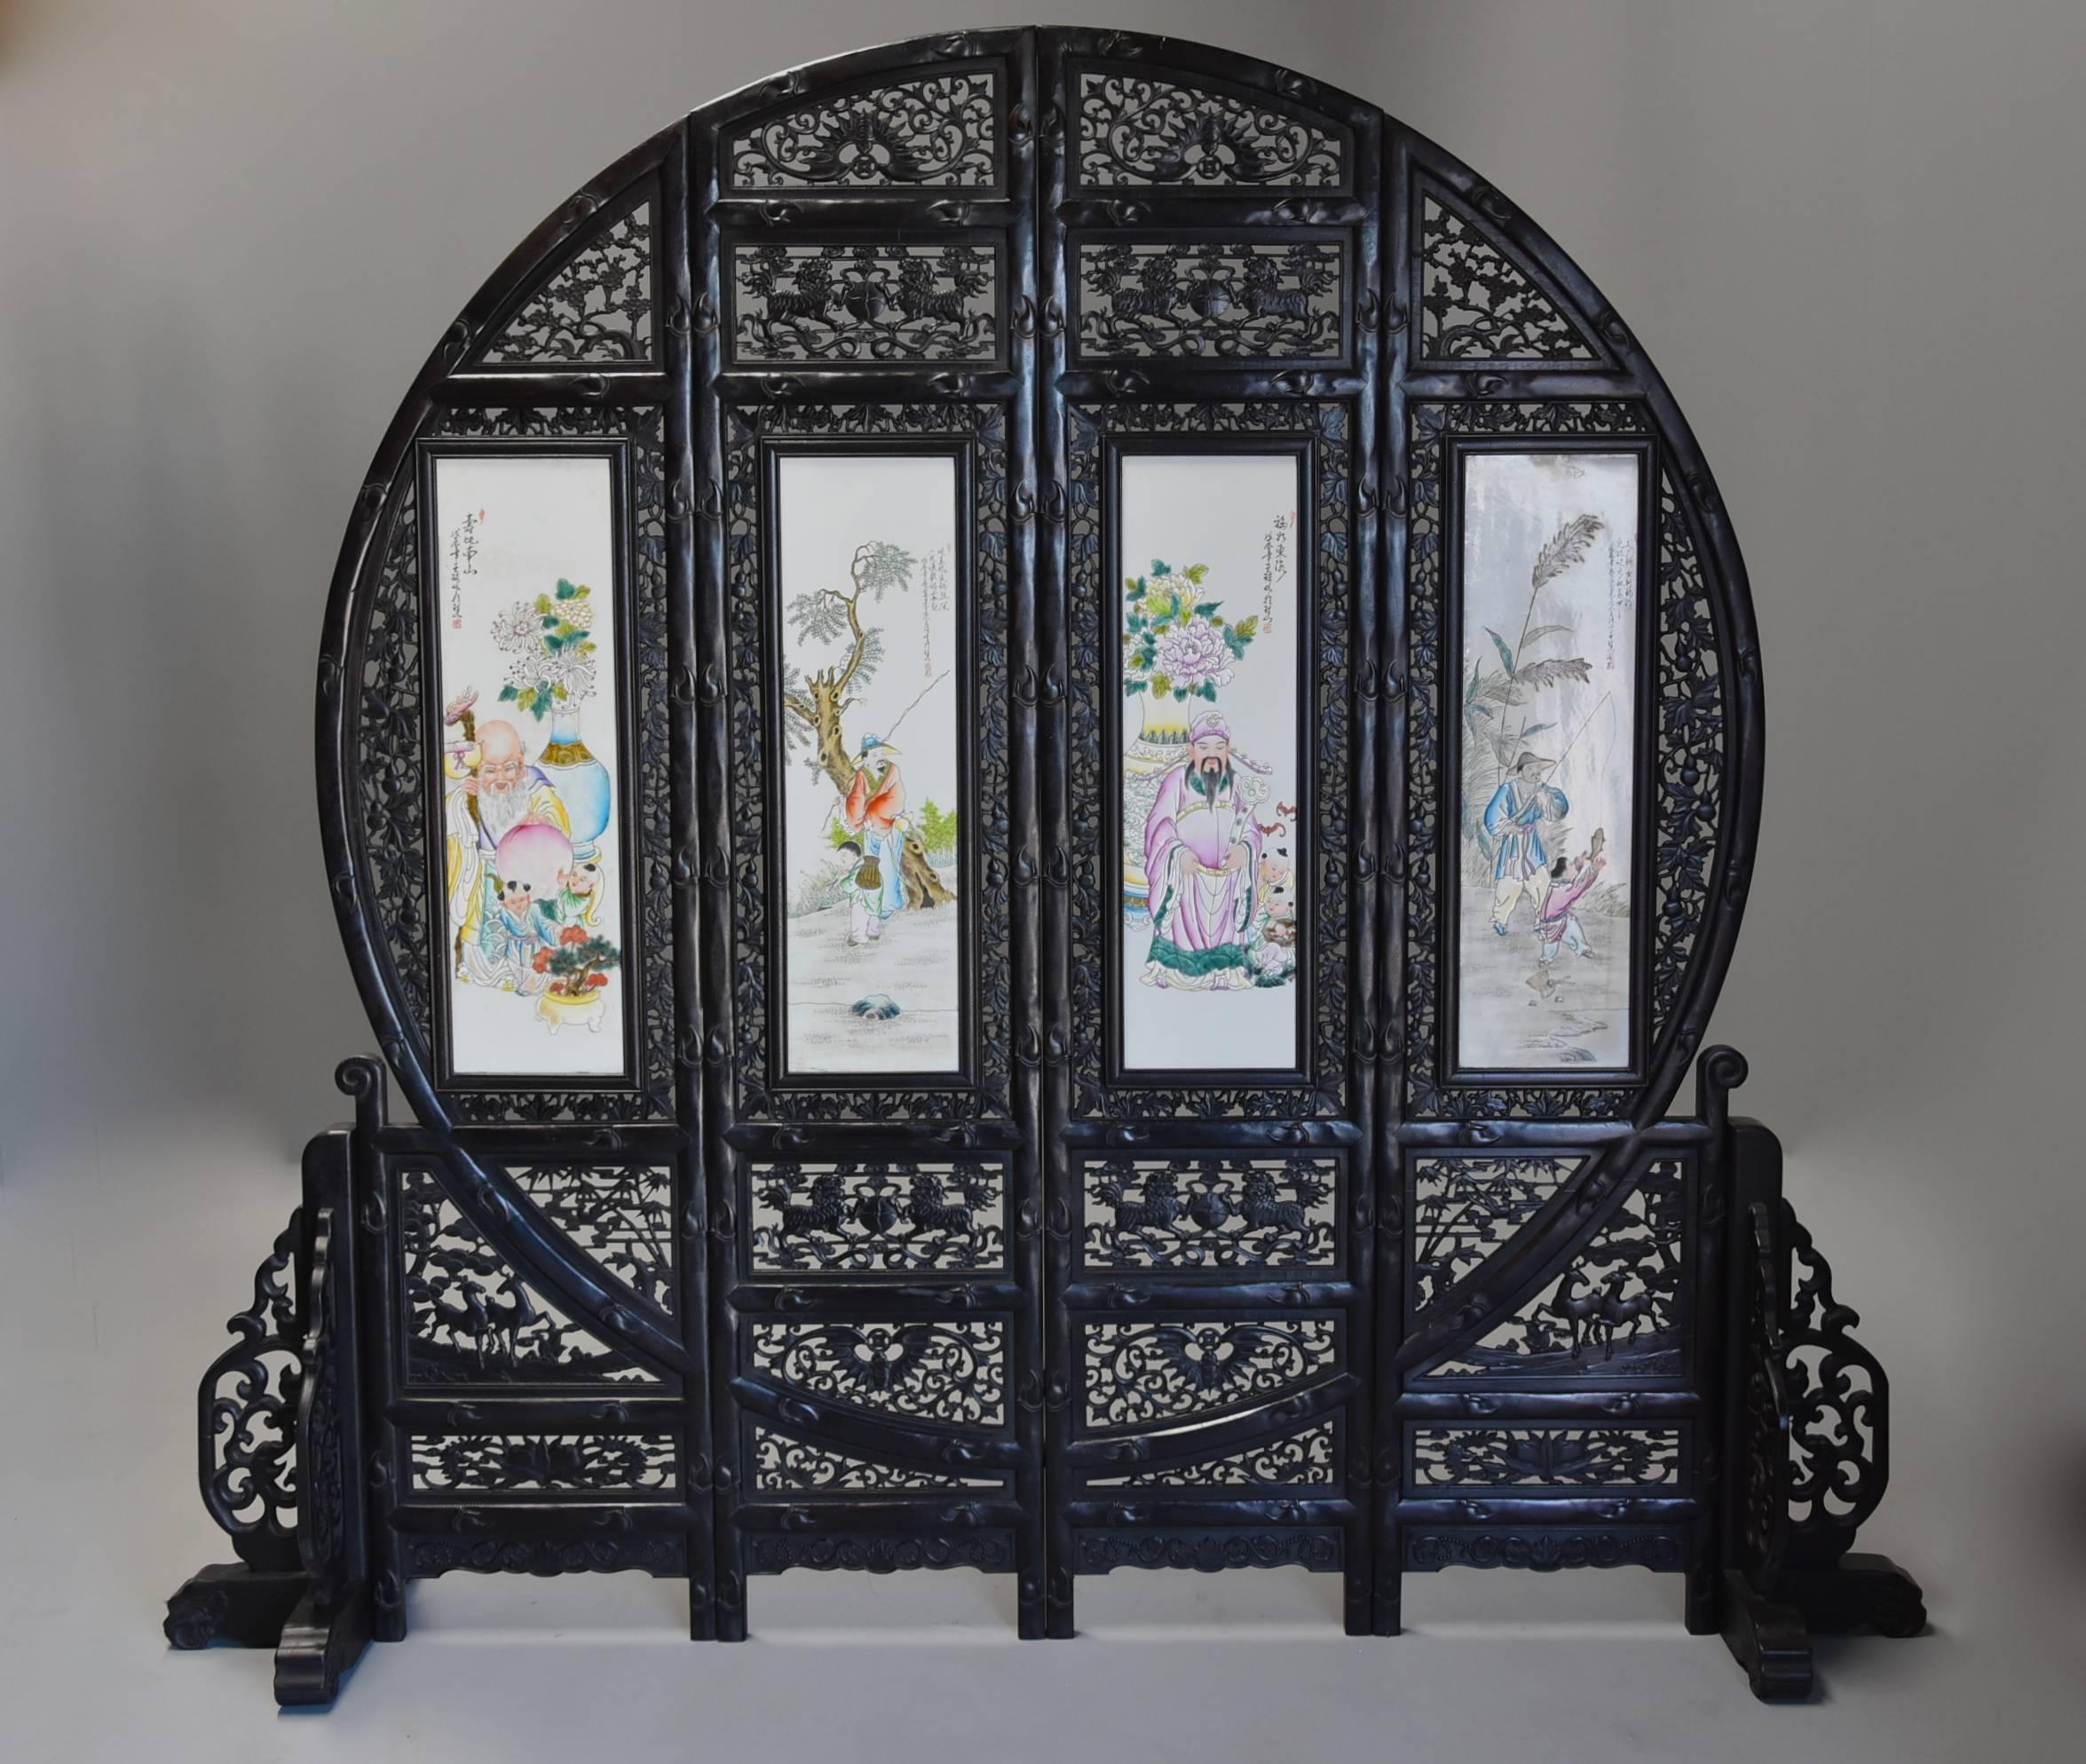 A 20th century highly decorative and excellent quality large circular Chinese carved hardwood four panel and double-sided screen.

This screen consists of four double-sided carved hardwood panels that interlock together to form a circular shaped